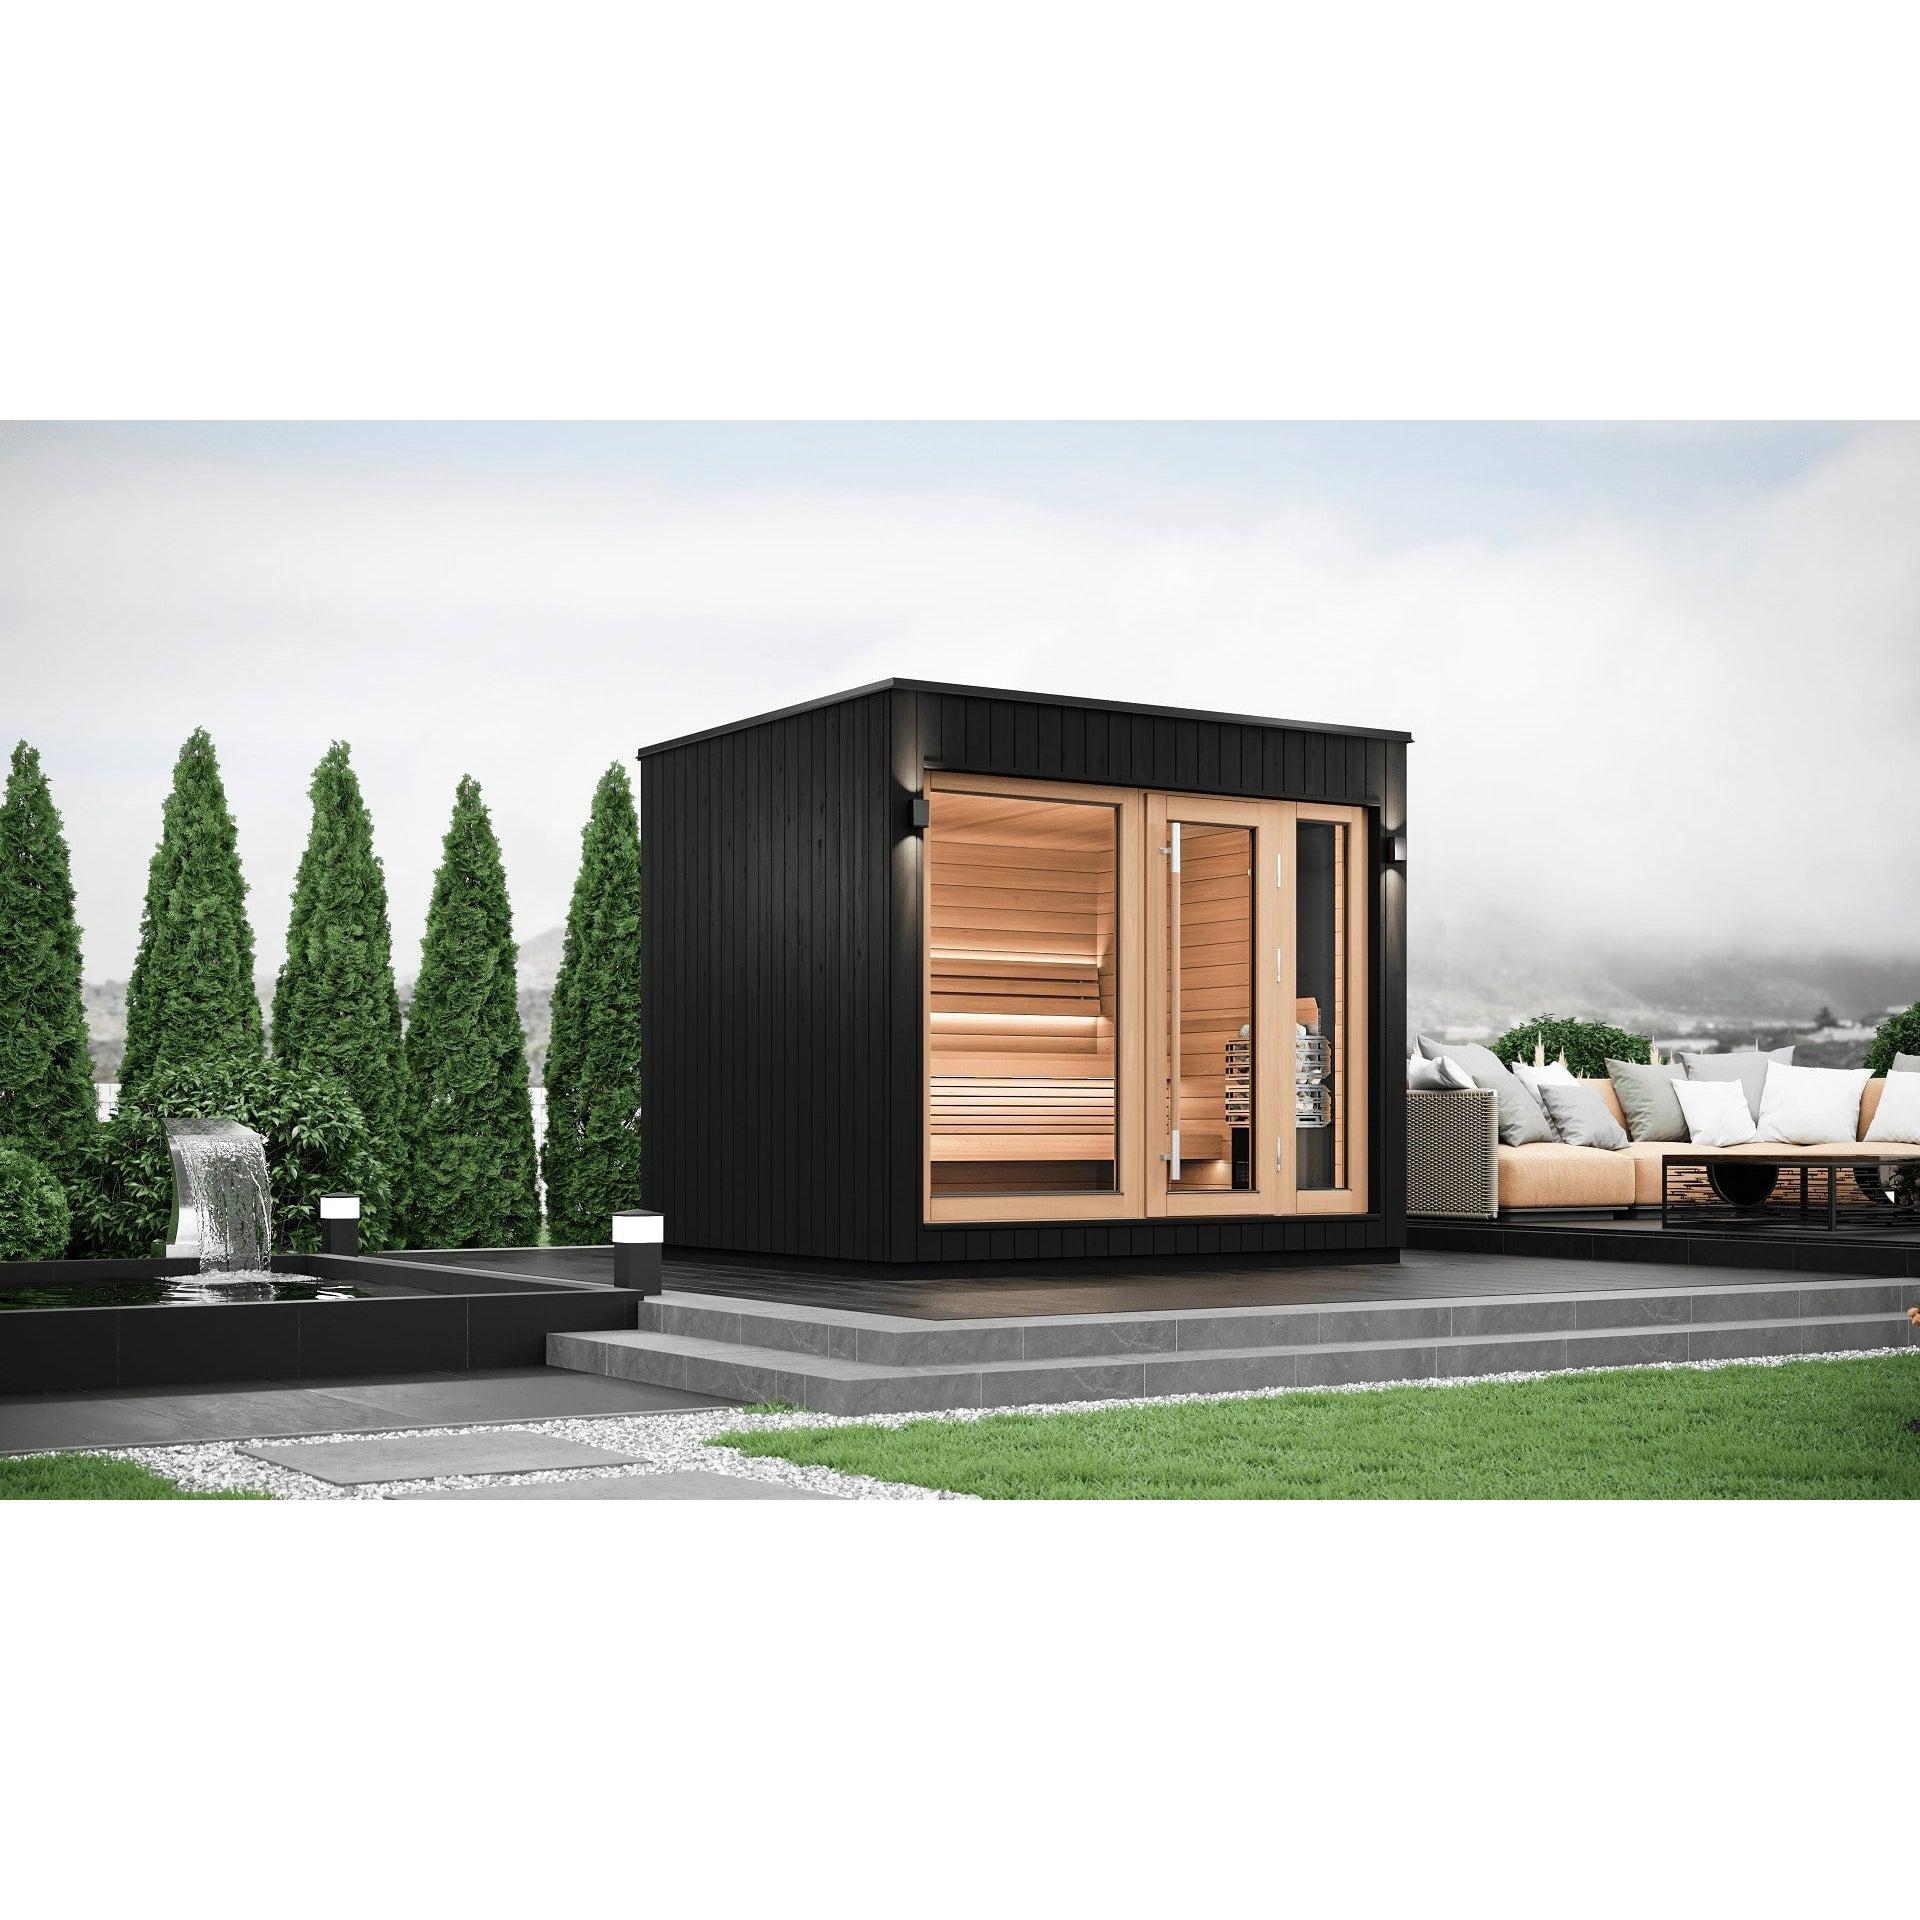 SaunaLife Model G7S Pre-Assembled Outdoor Home Sauna - Right Swing Door - Purely Relaxation